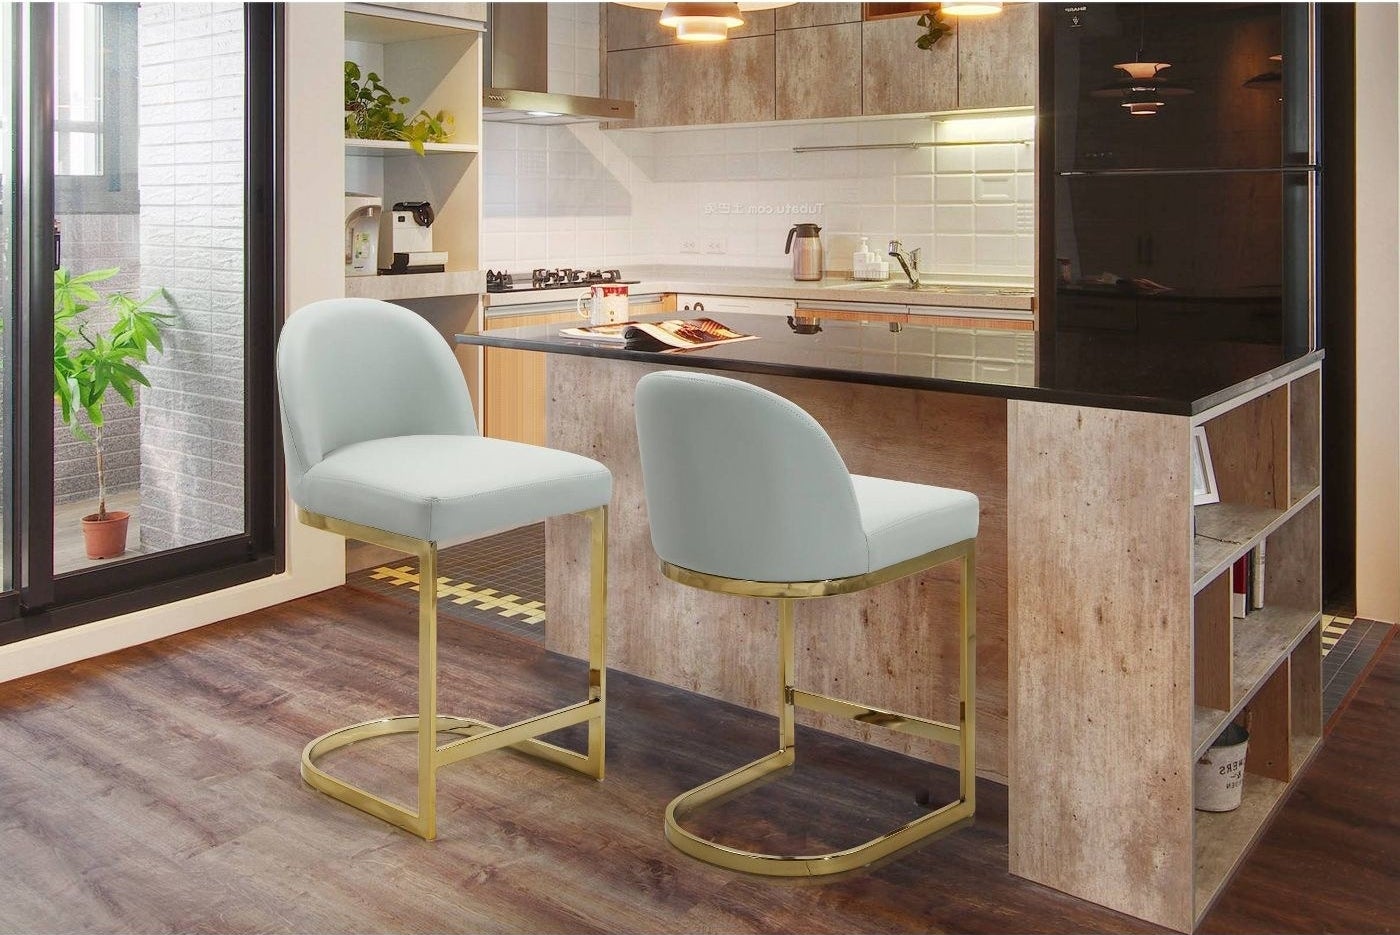 plush blue bar stools with backs on a gold stand